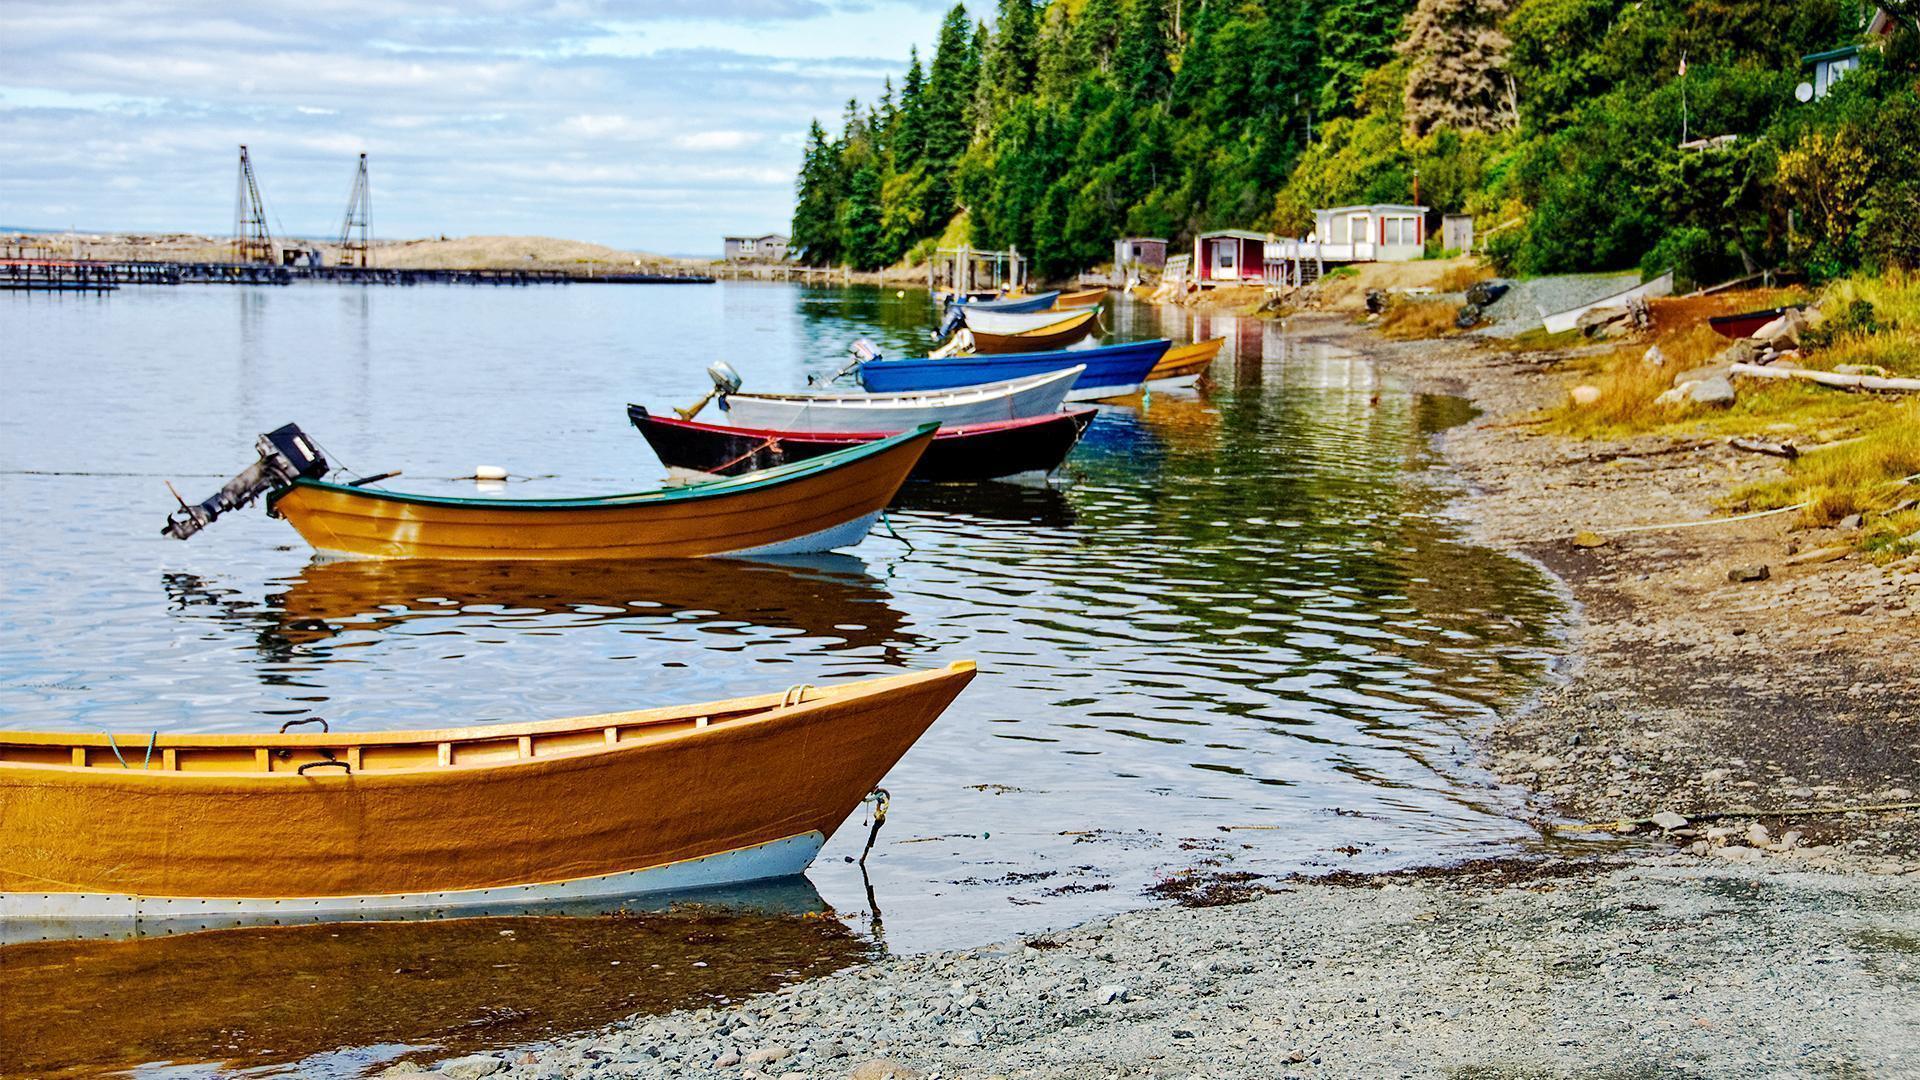 Dark Harbour on Grand Manan Island is a great place to slow down